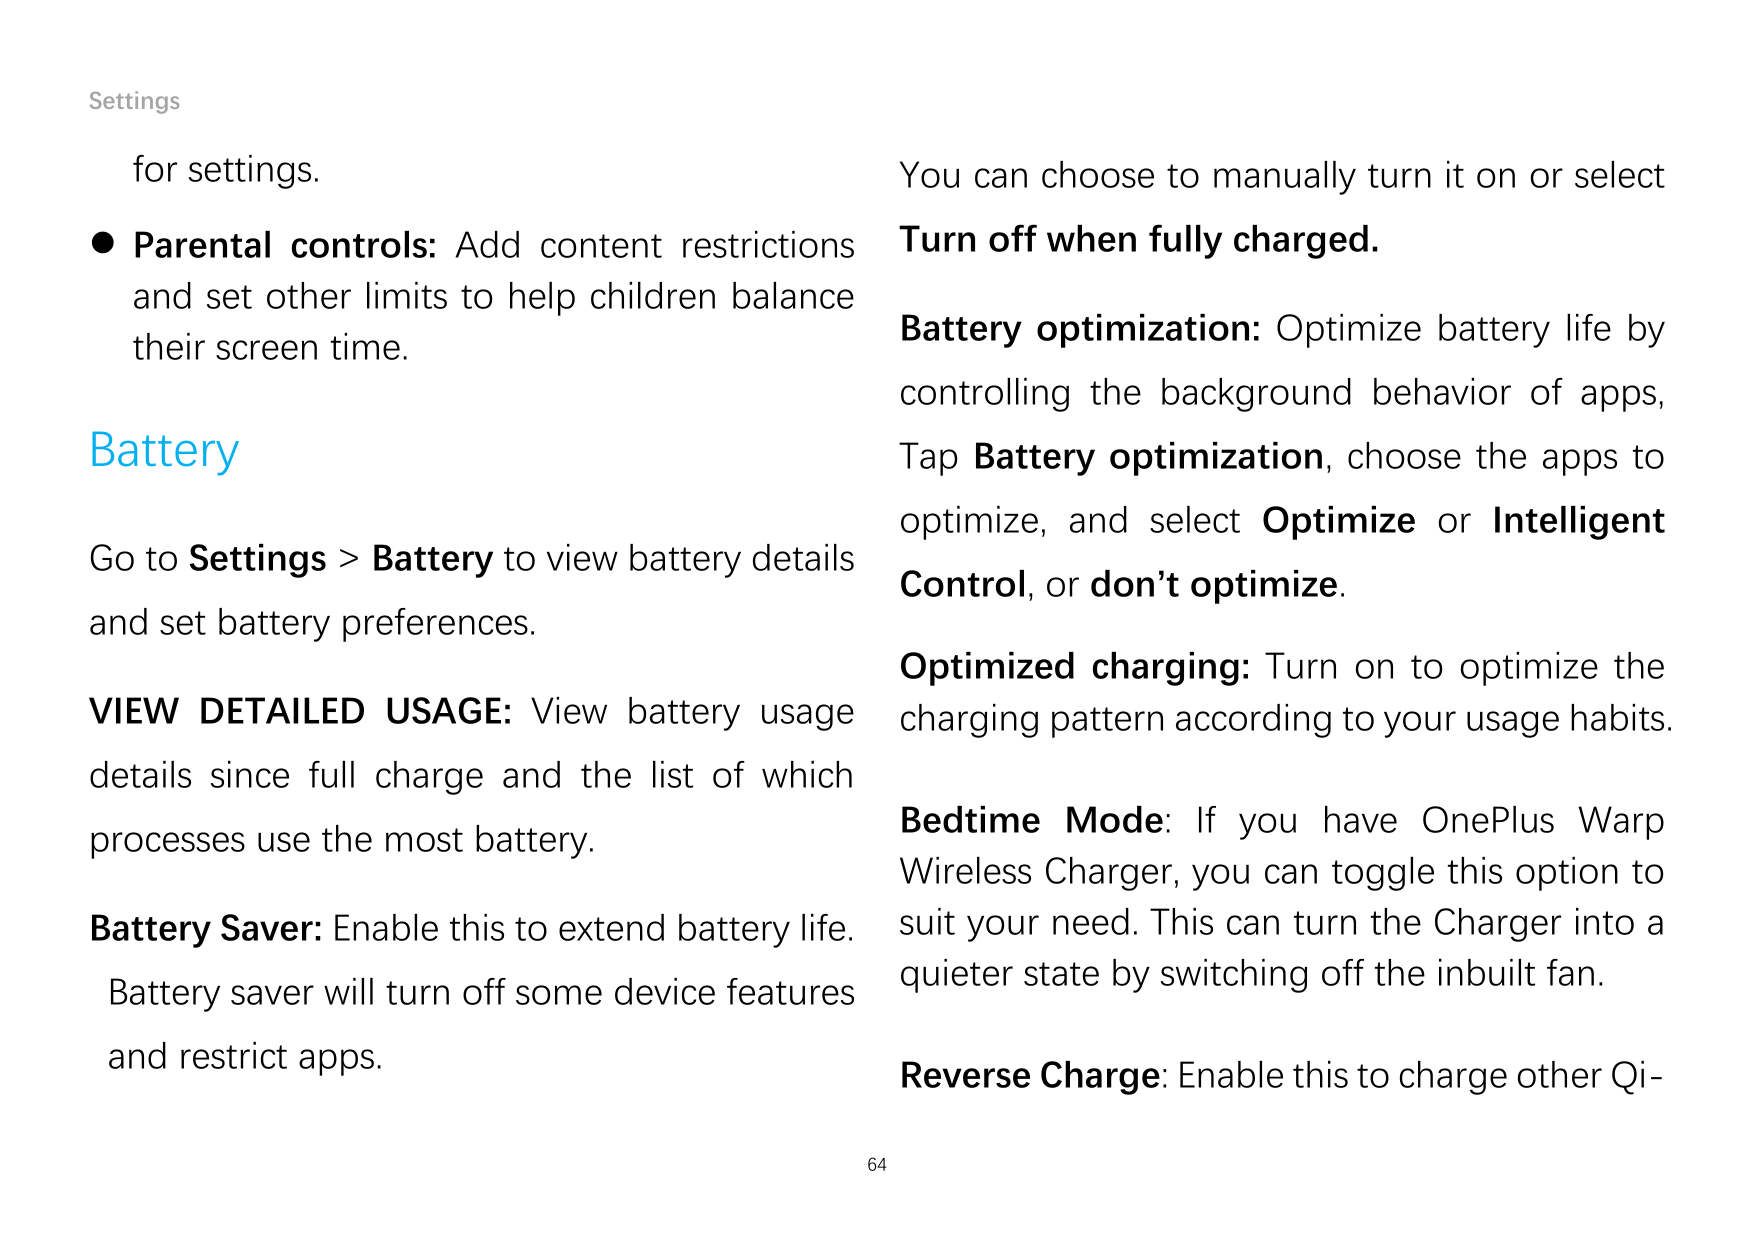 Settingsfor settings.You can choose to manually turn it on or selectTurn off when fully charged. Parental controls: Add content